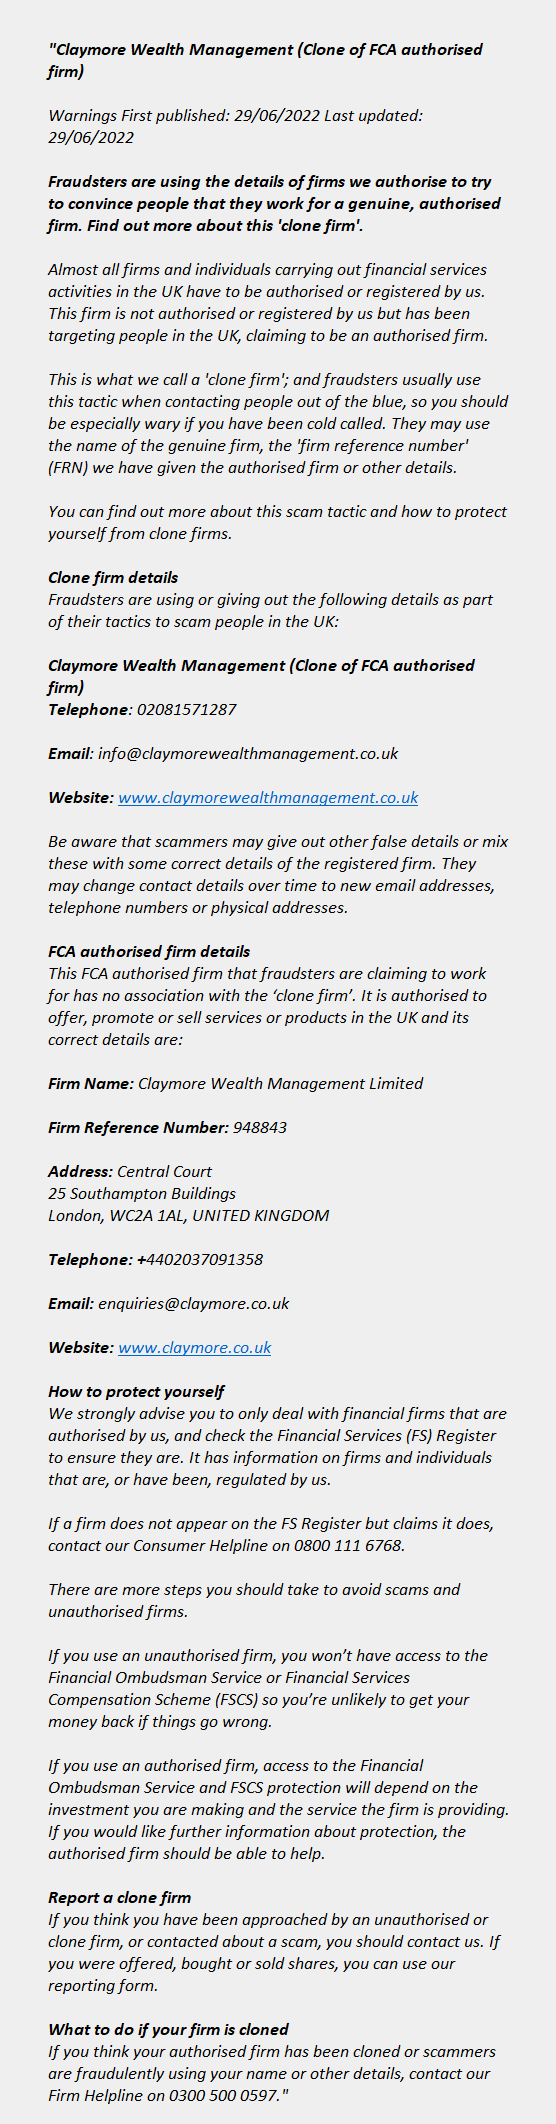 claymorewealthmanagement.co.uk (Clone) – Claymore Wealth Management (Clone)